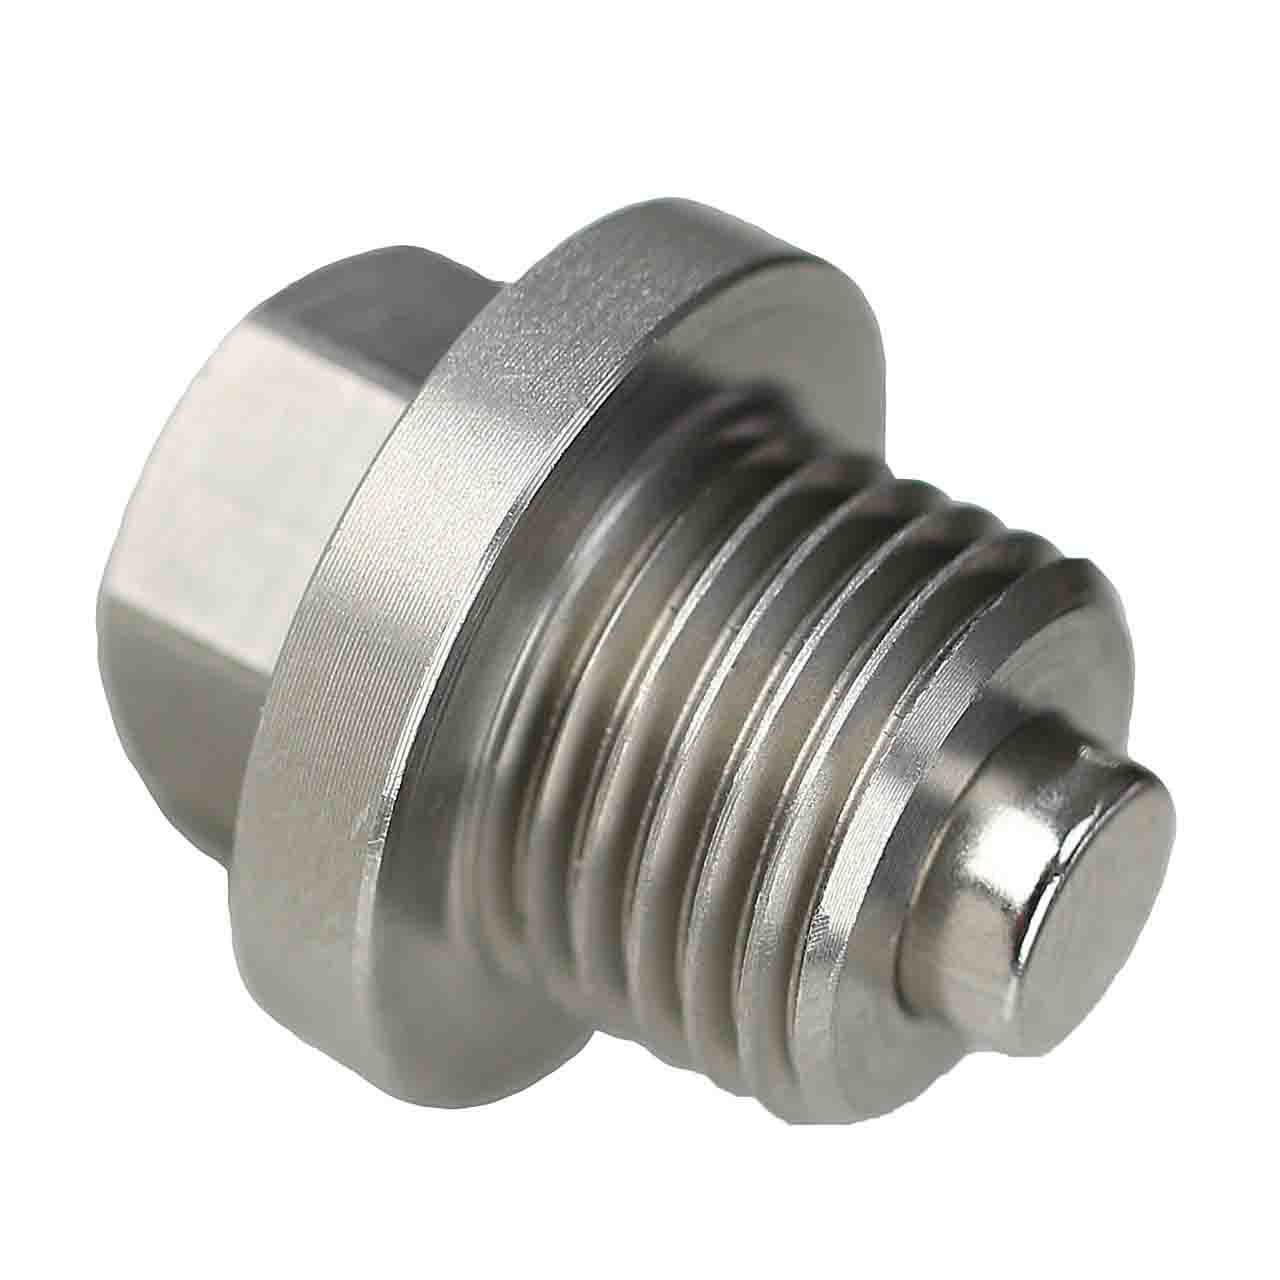 MG MGA Magnetic Oil Drain Plug - 1958-1962 - 1.6 Liter - 4 Cylinder - Made In USA - Stainless Steel - Part Number 88G257